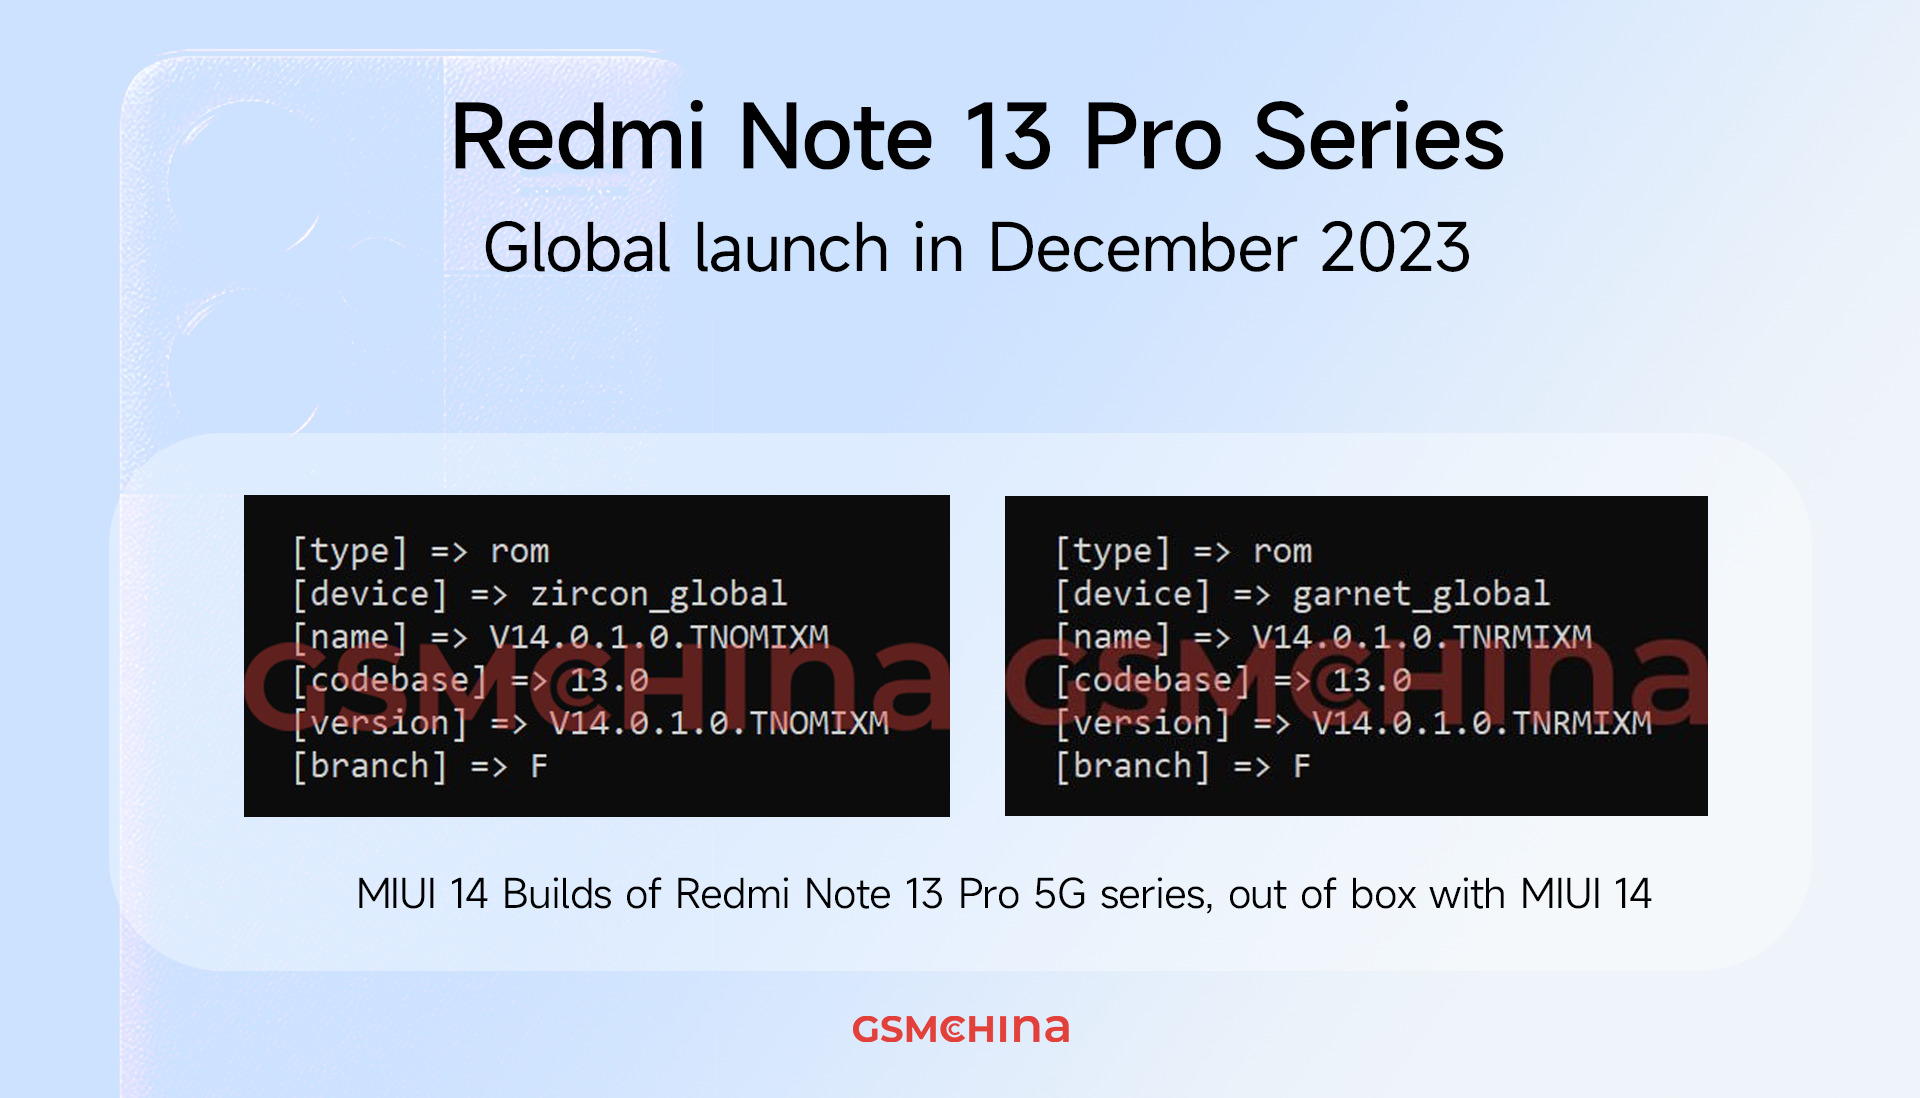 Redmi Note 13 series will be launched globally in December - GSMChina